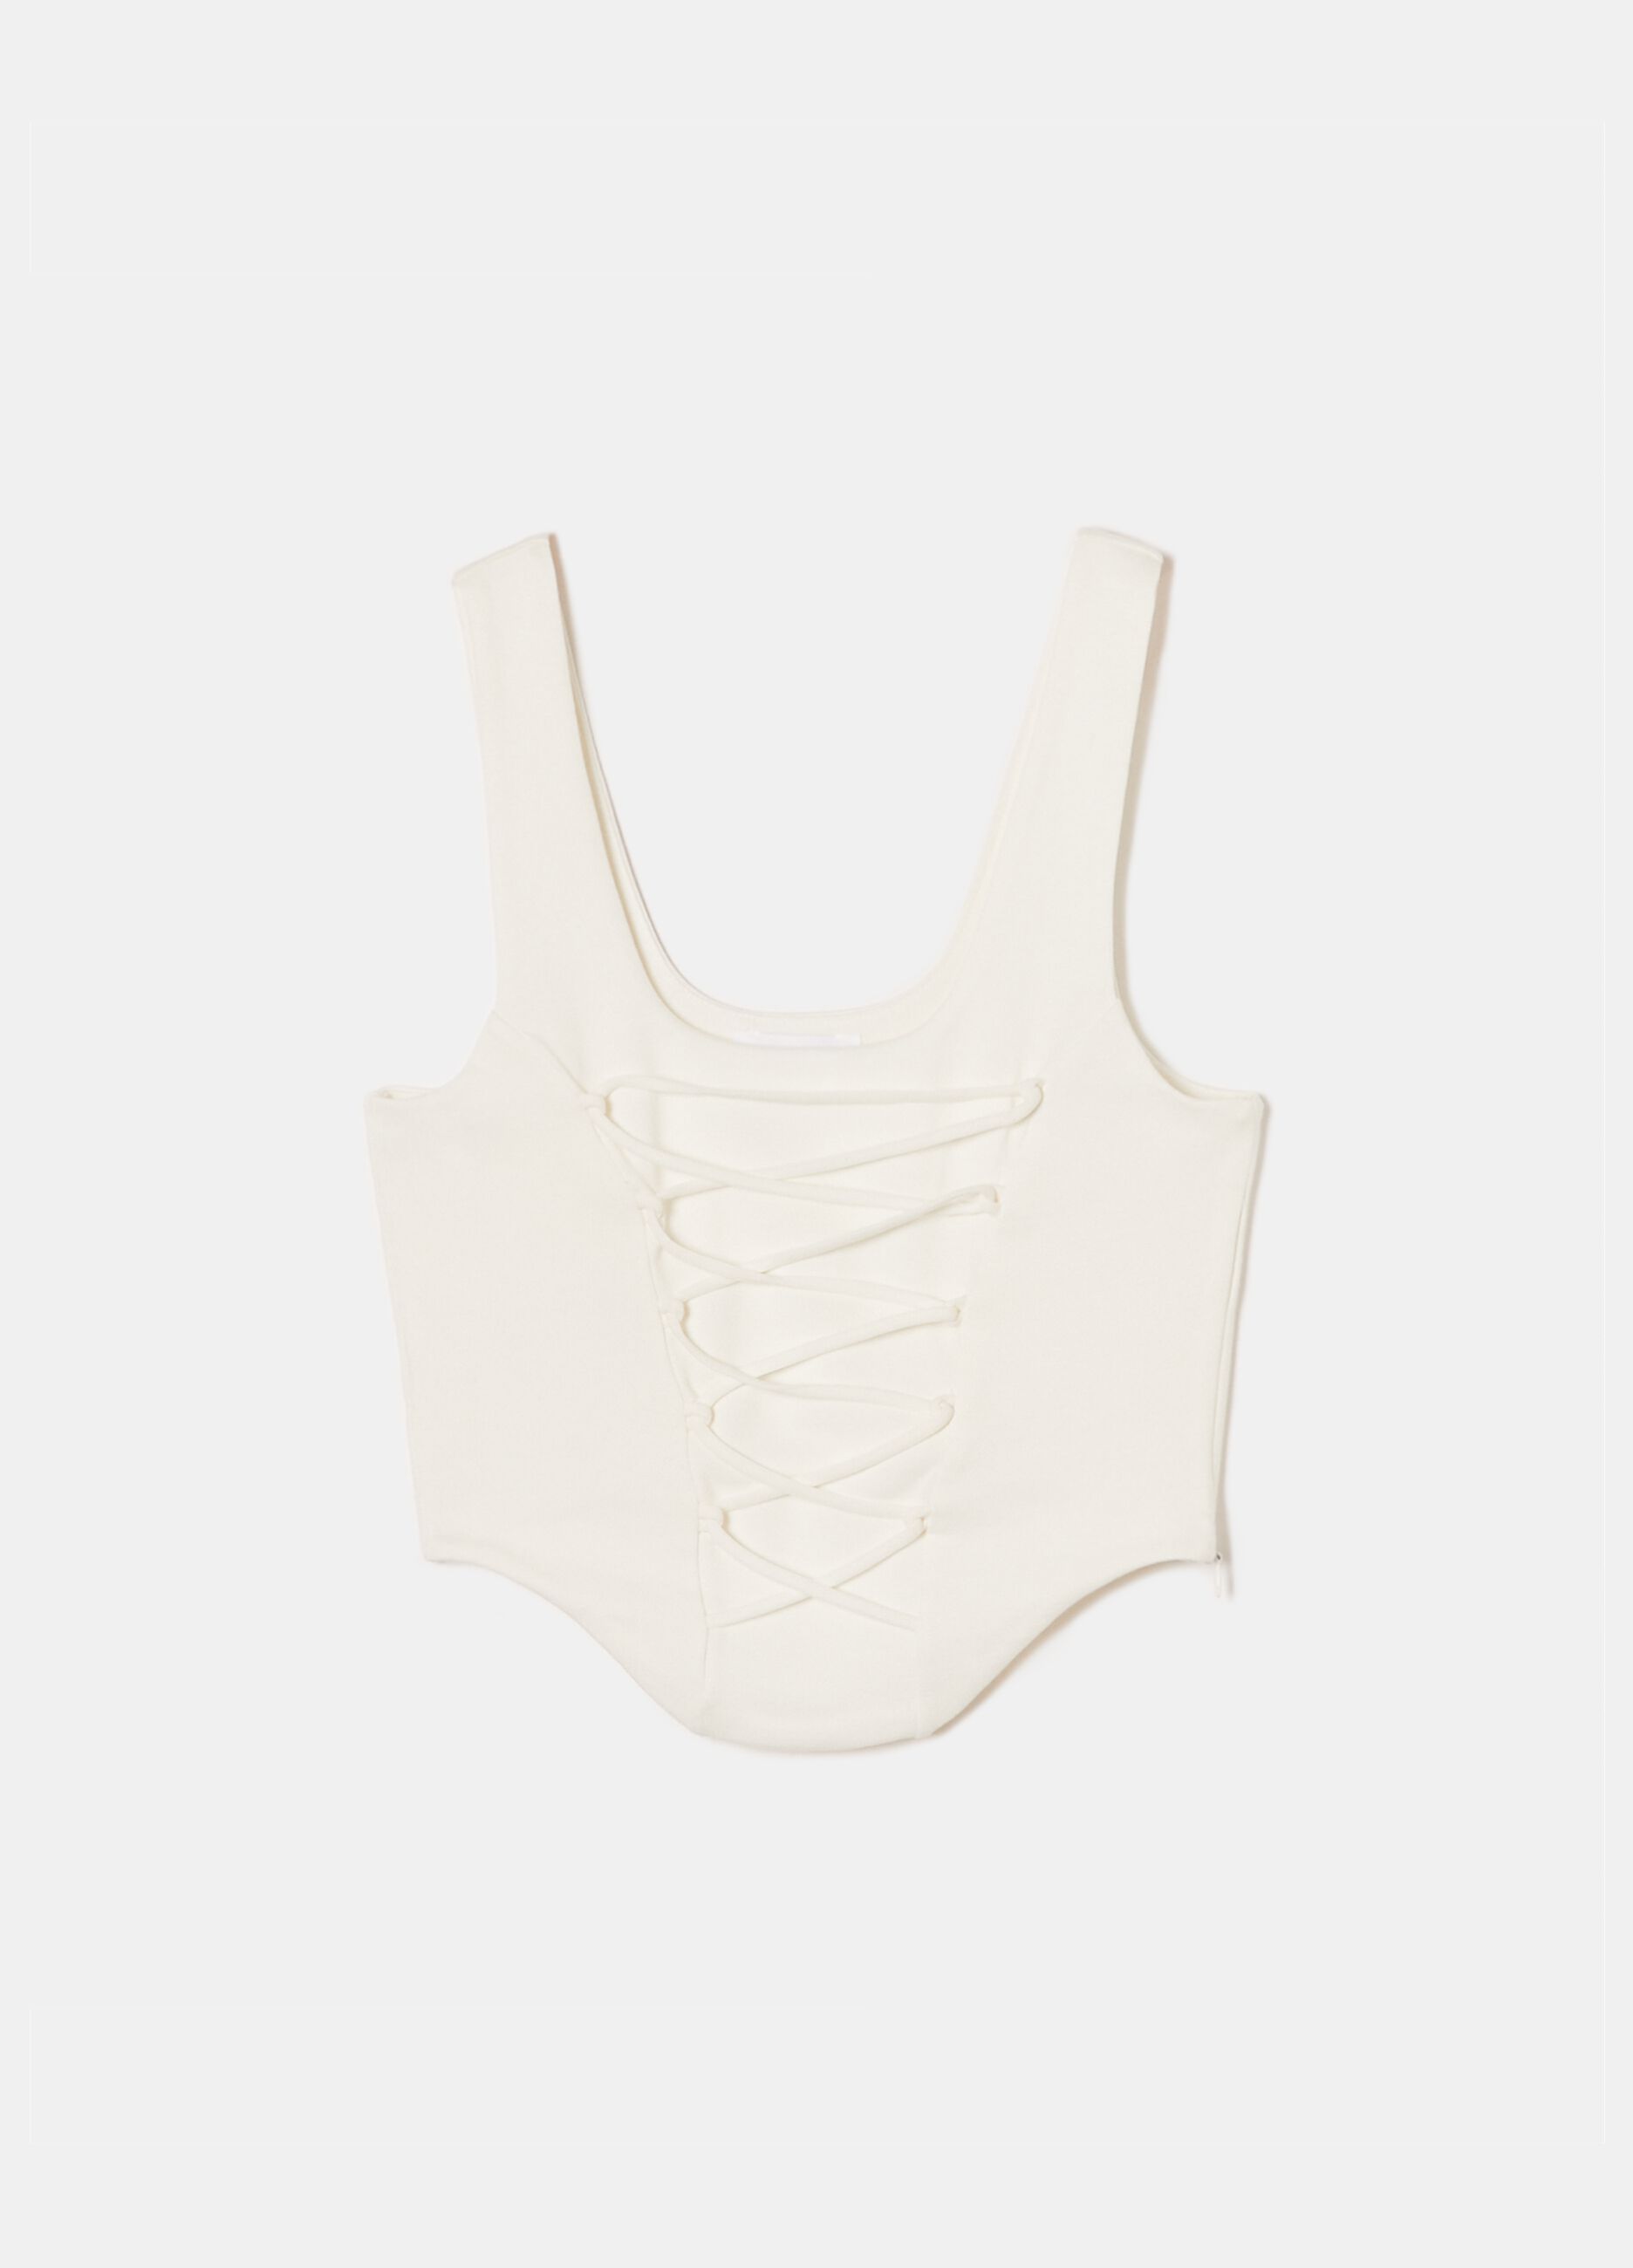 Corset cropped top with crisscross lacing